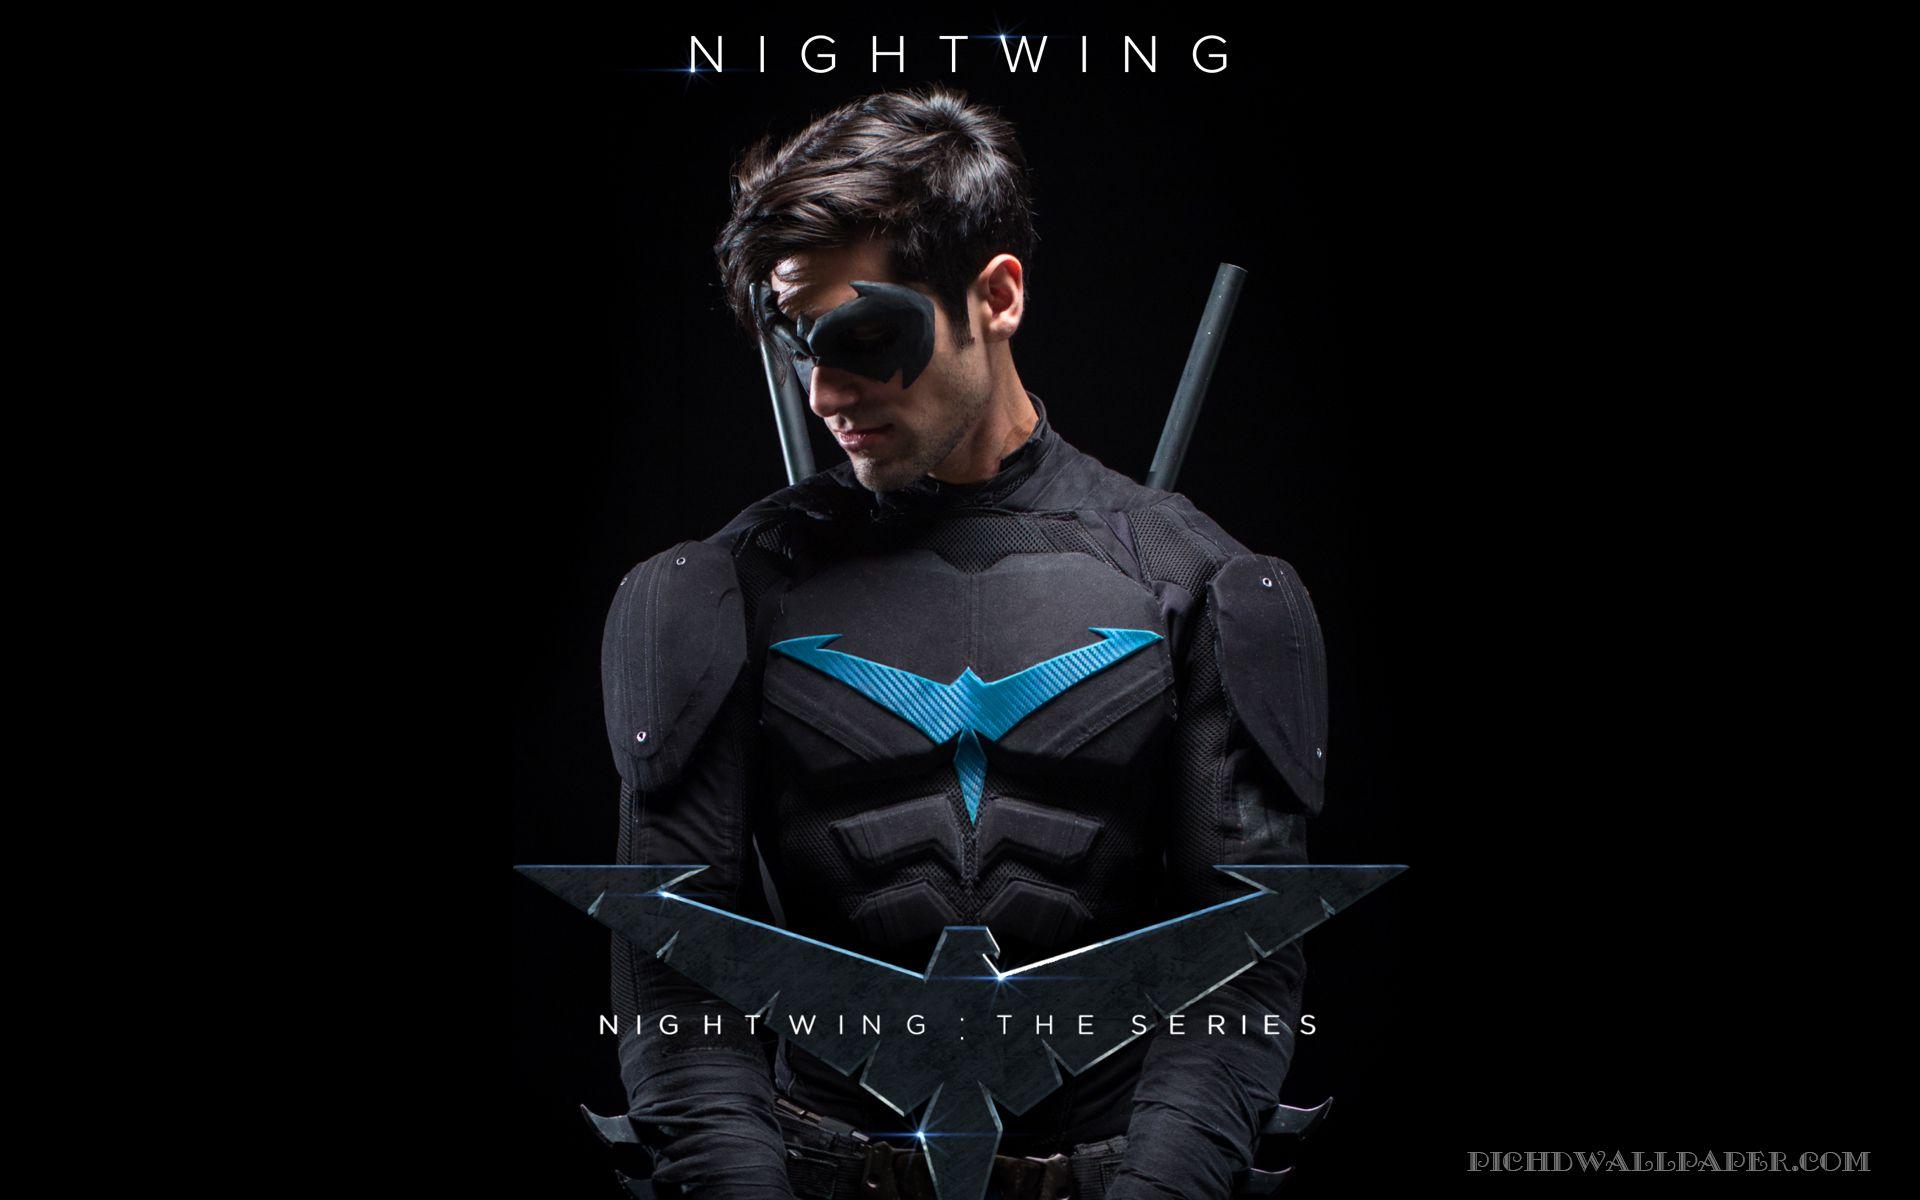 Nightwing Wallpaper Unique Nightwing Wallpaper Browse